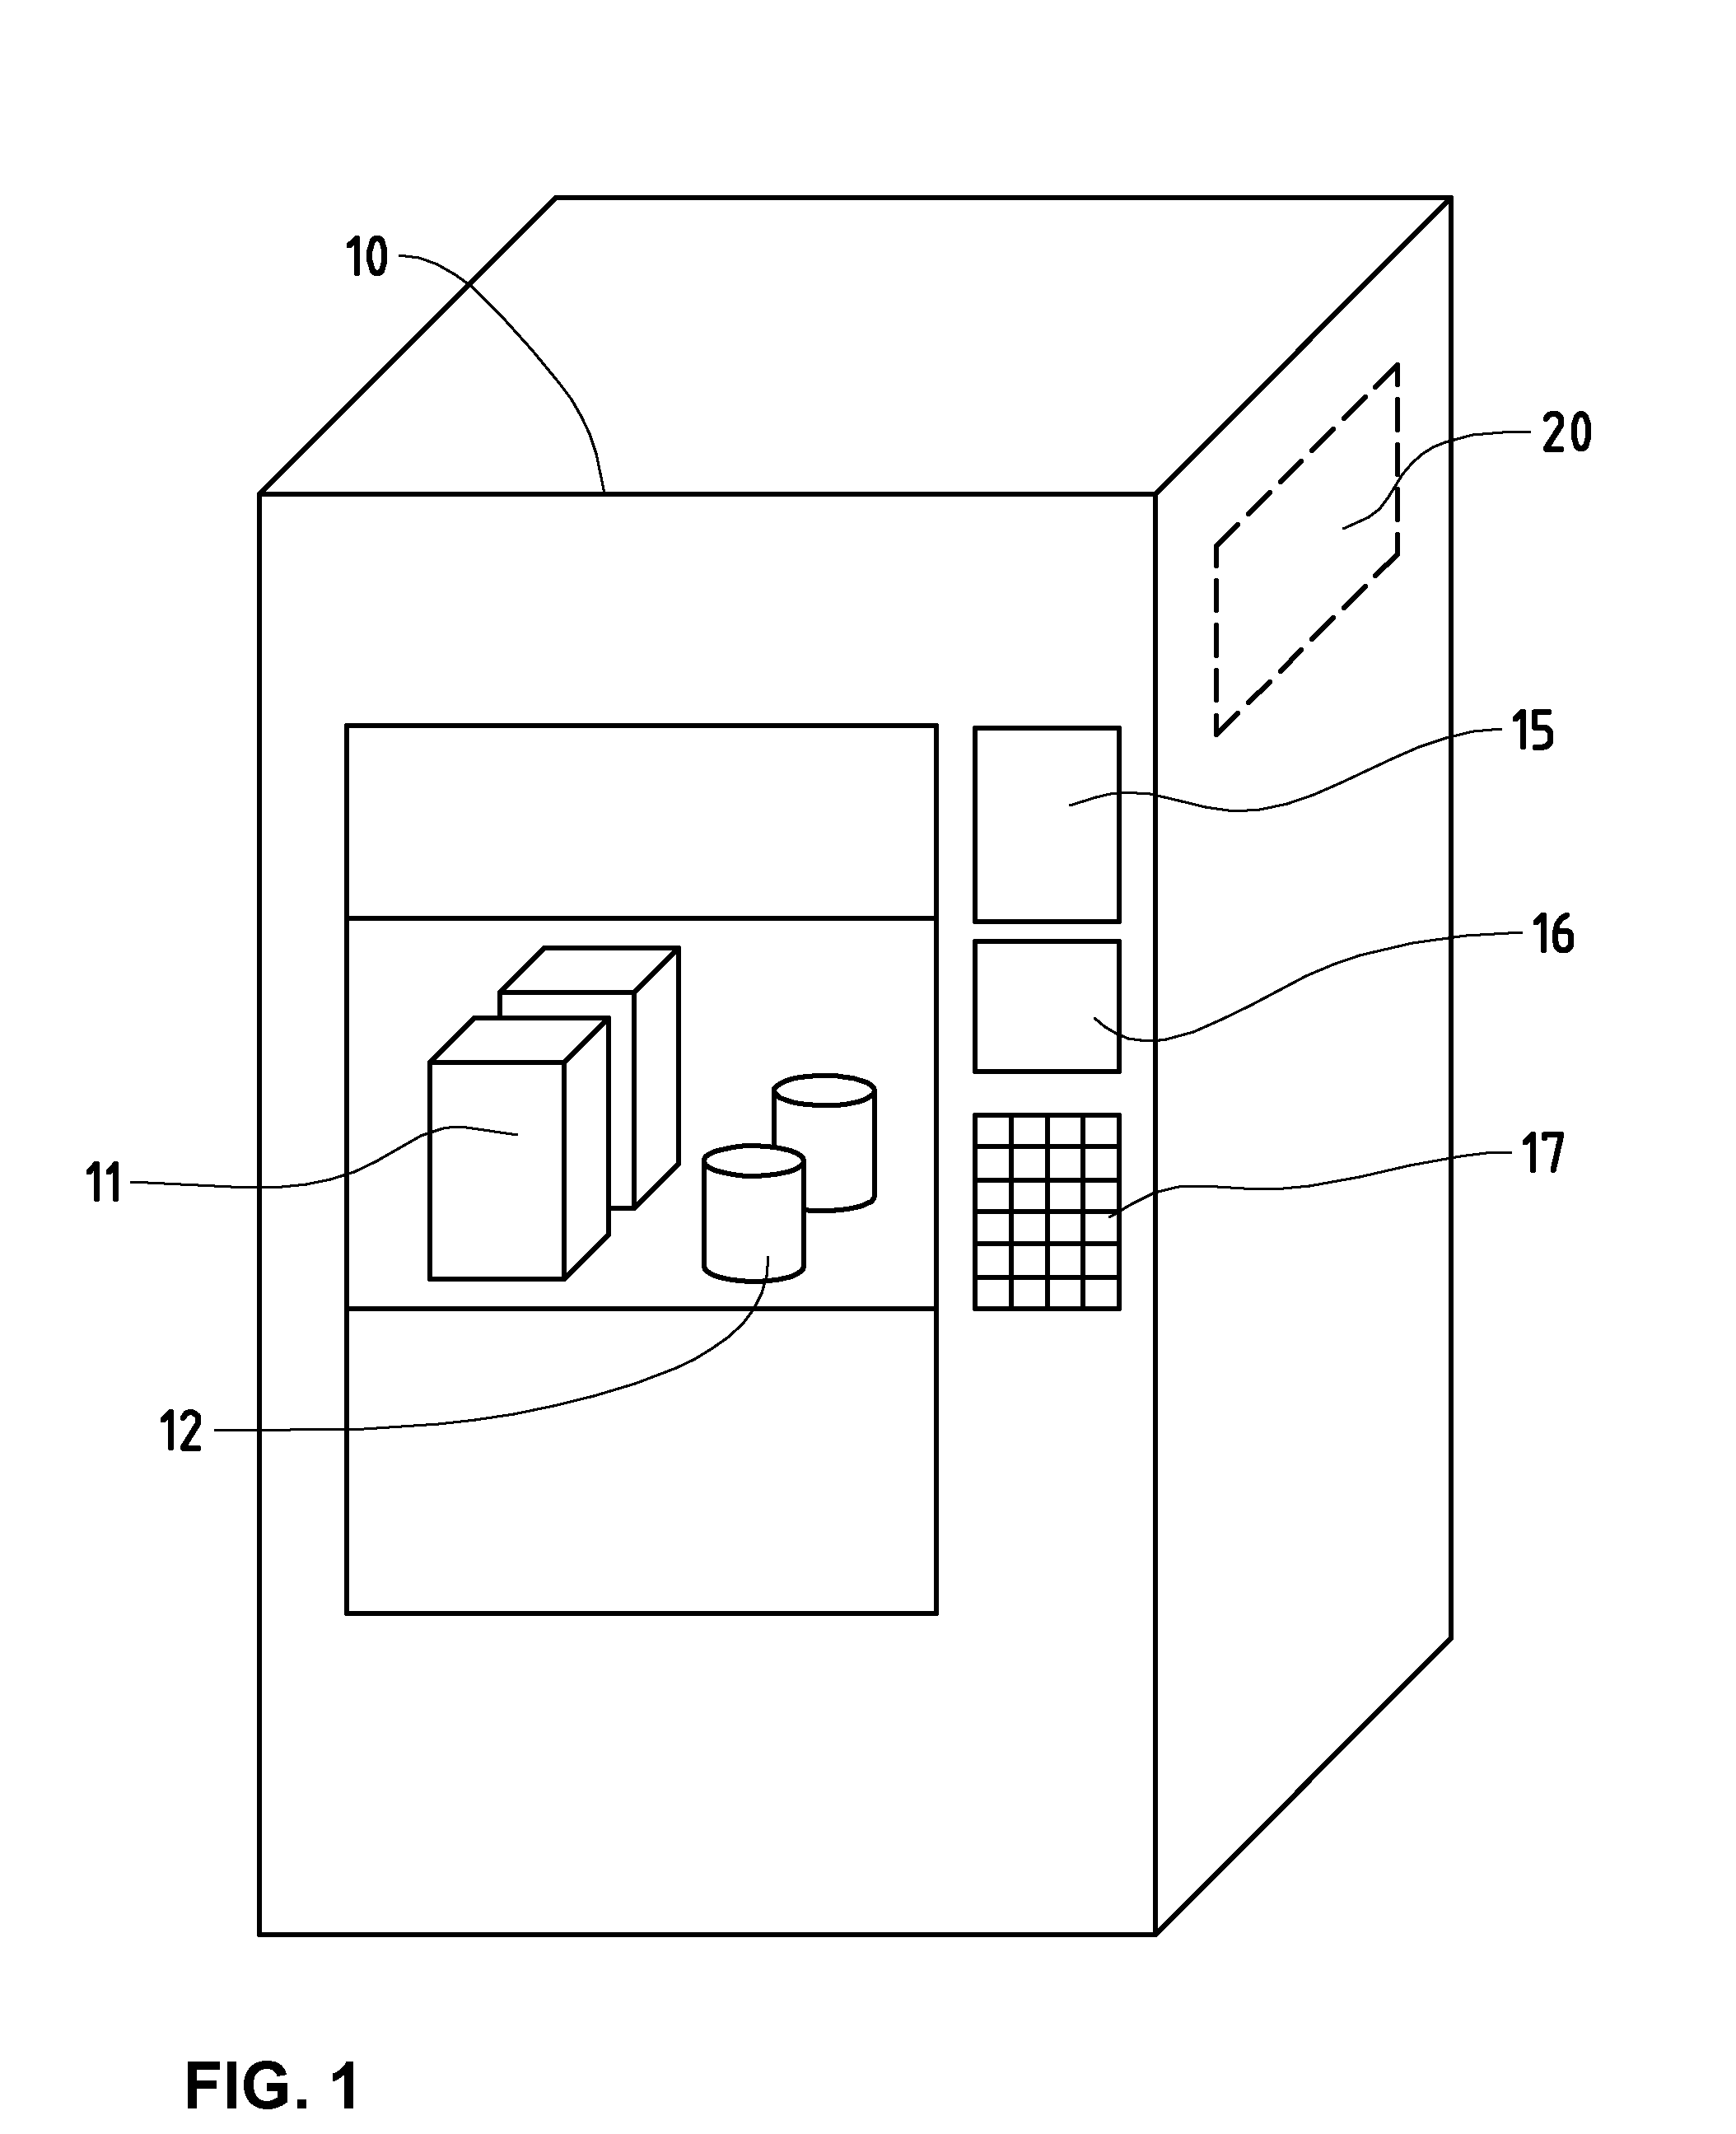 Method and system for authorizing access to goods and/or services and corresponding access voucher